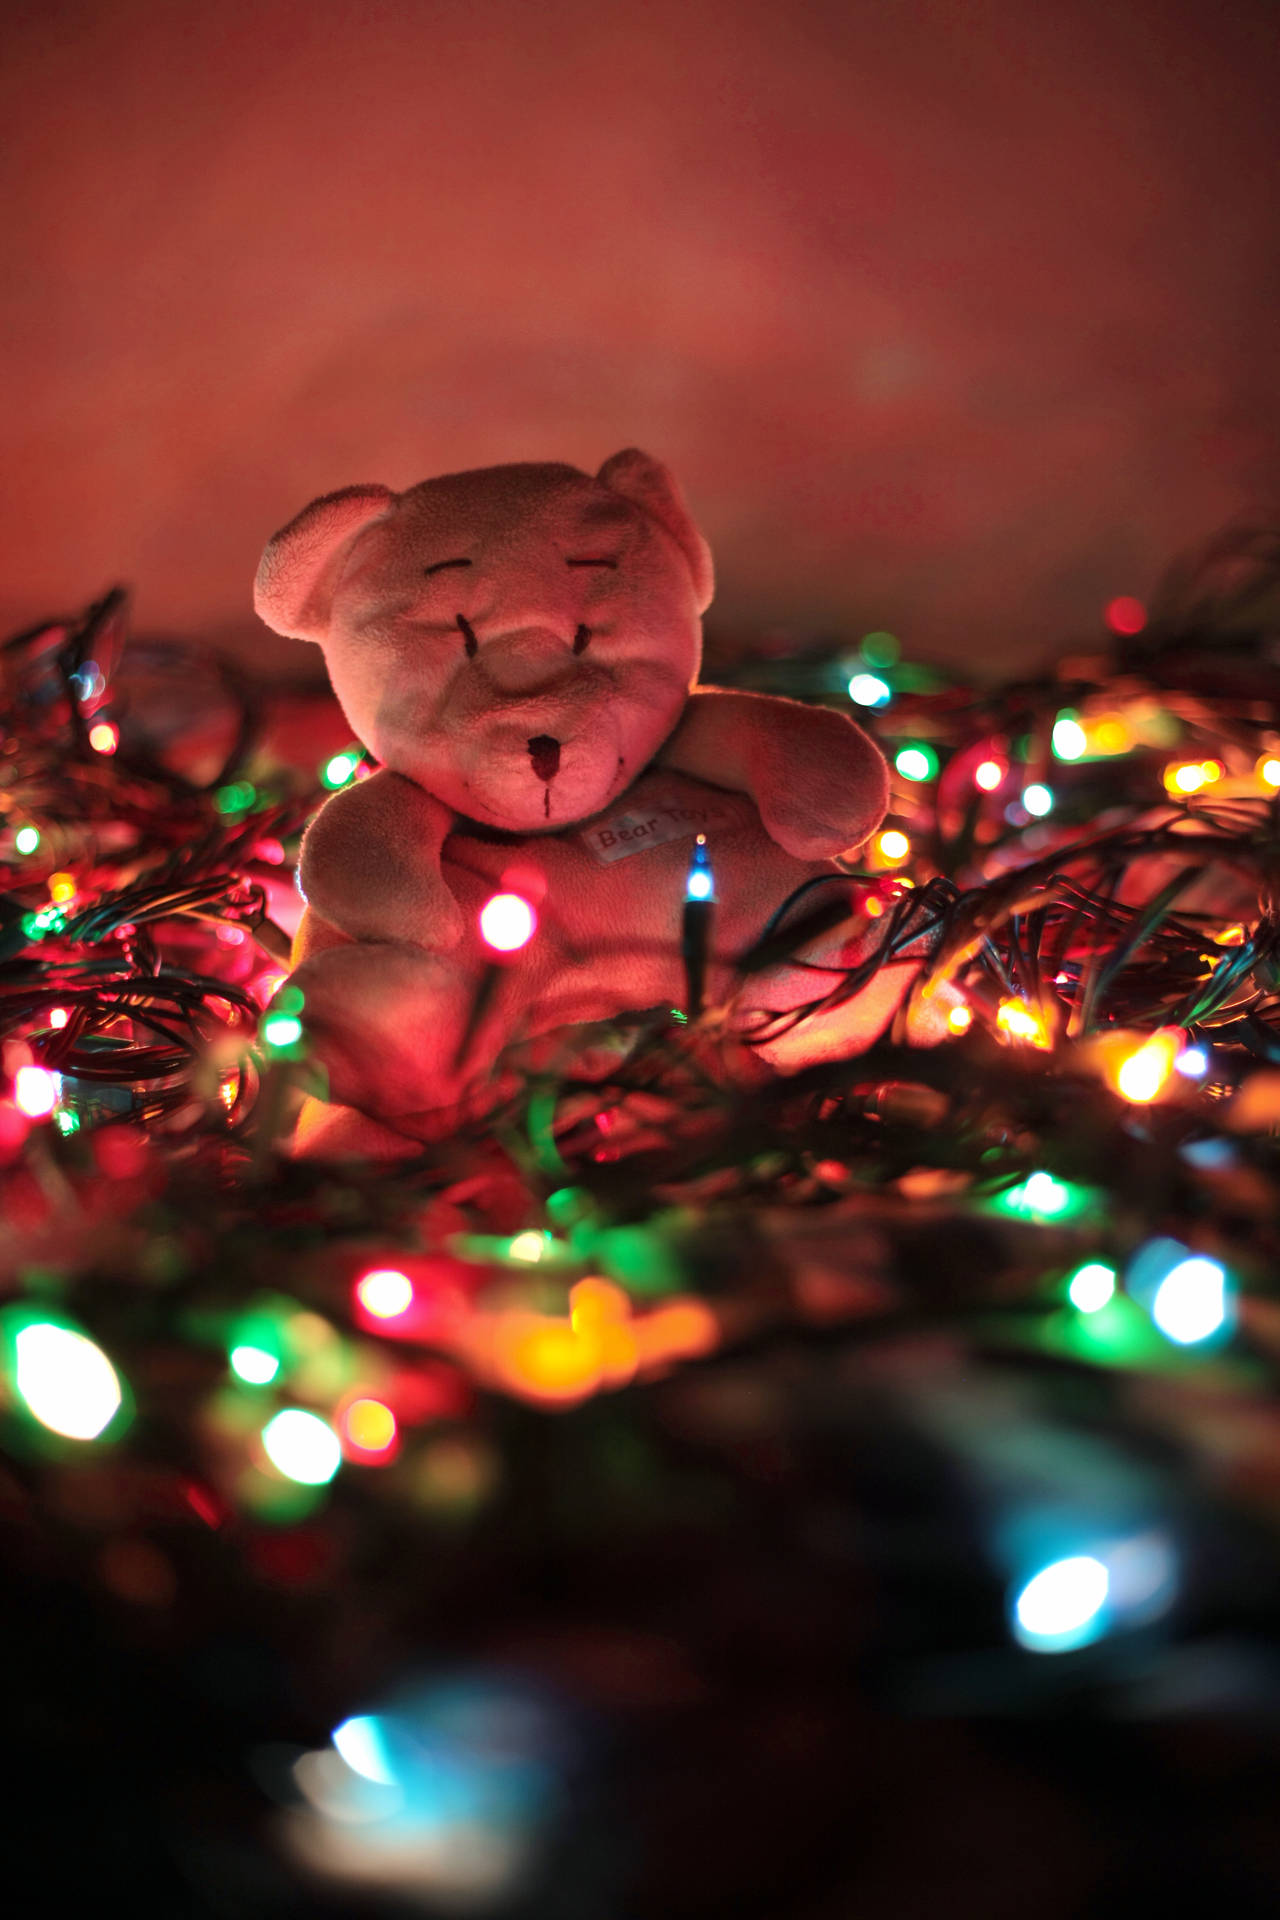 Cute Teddy Bear With Lights Background